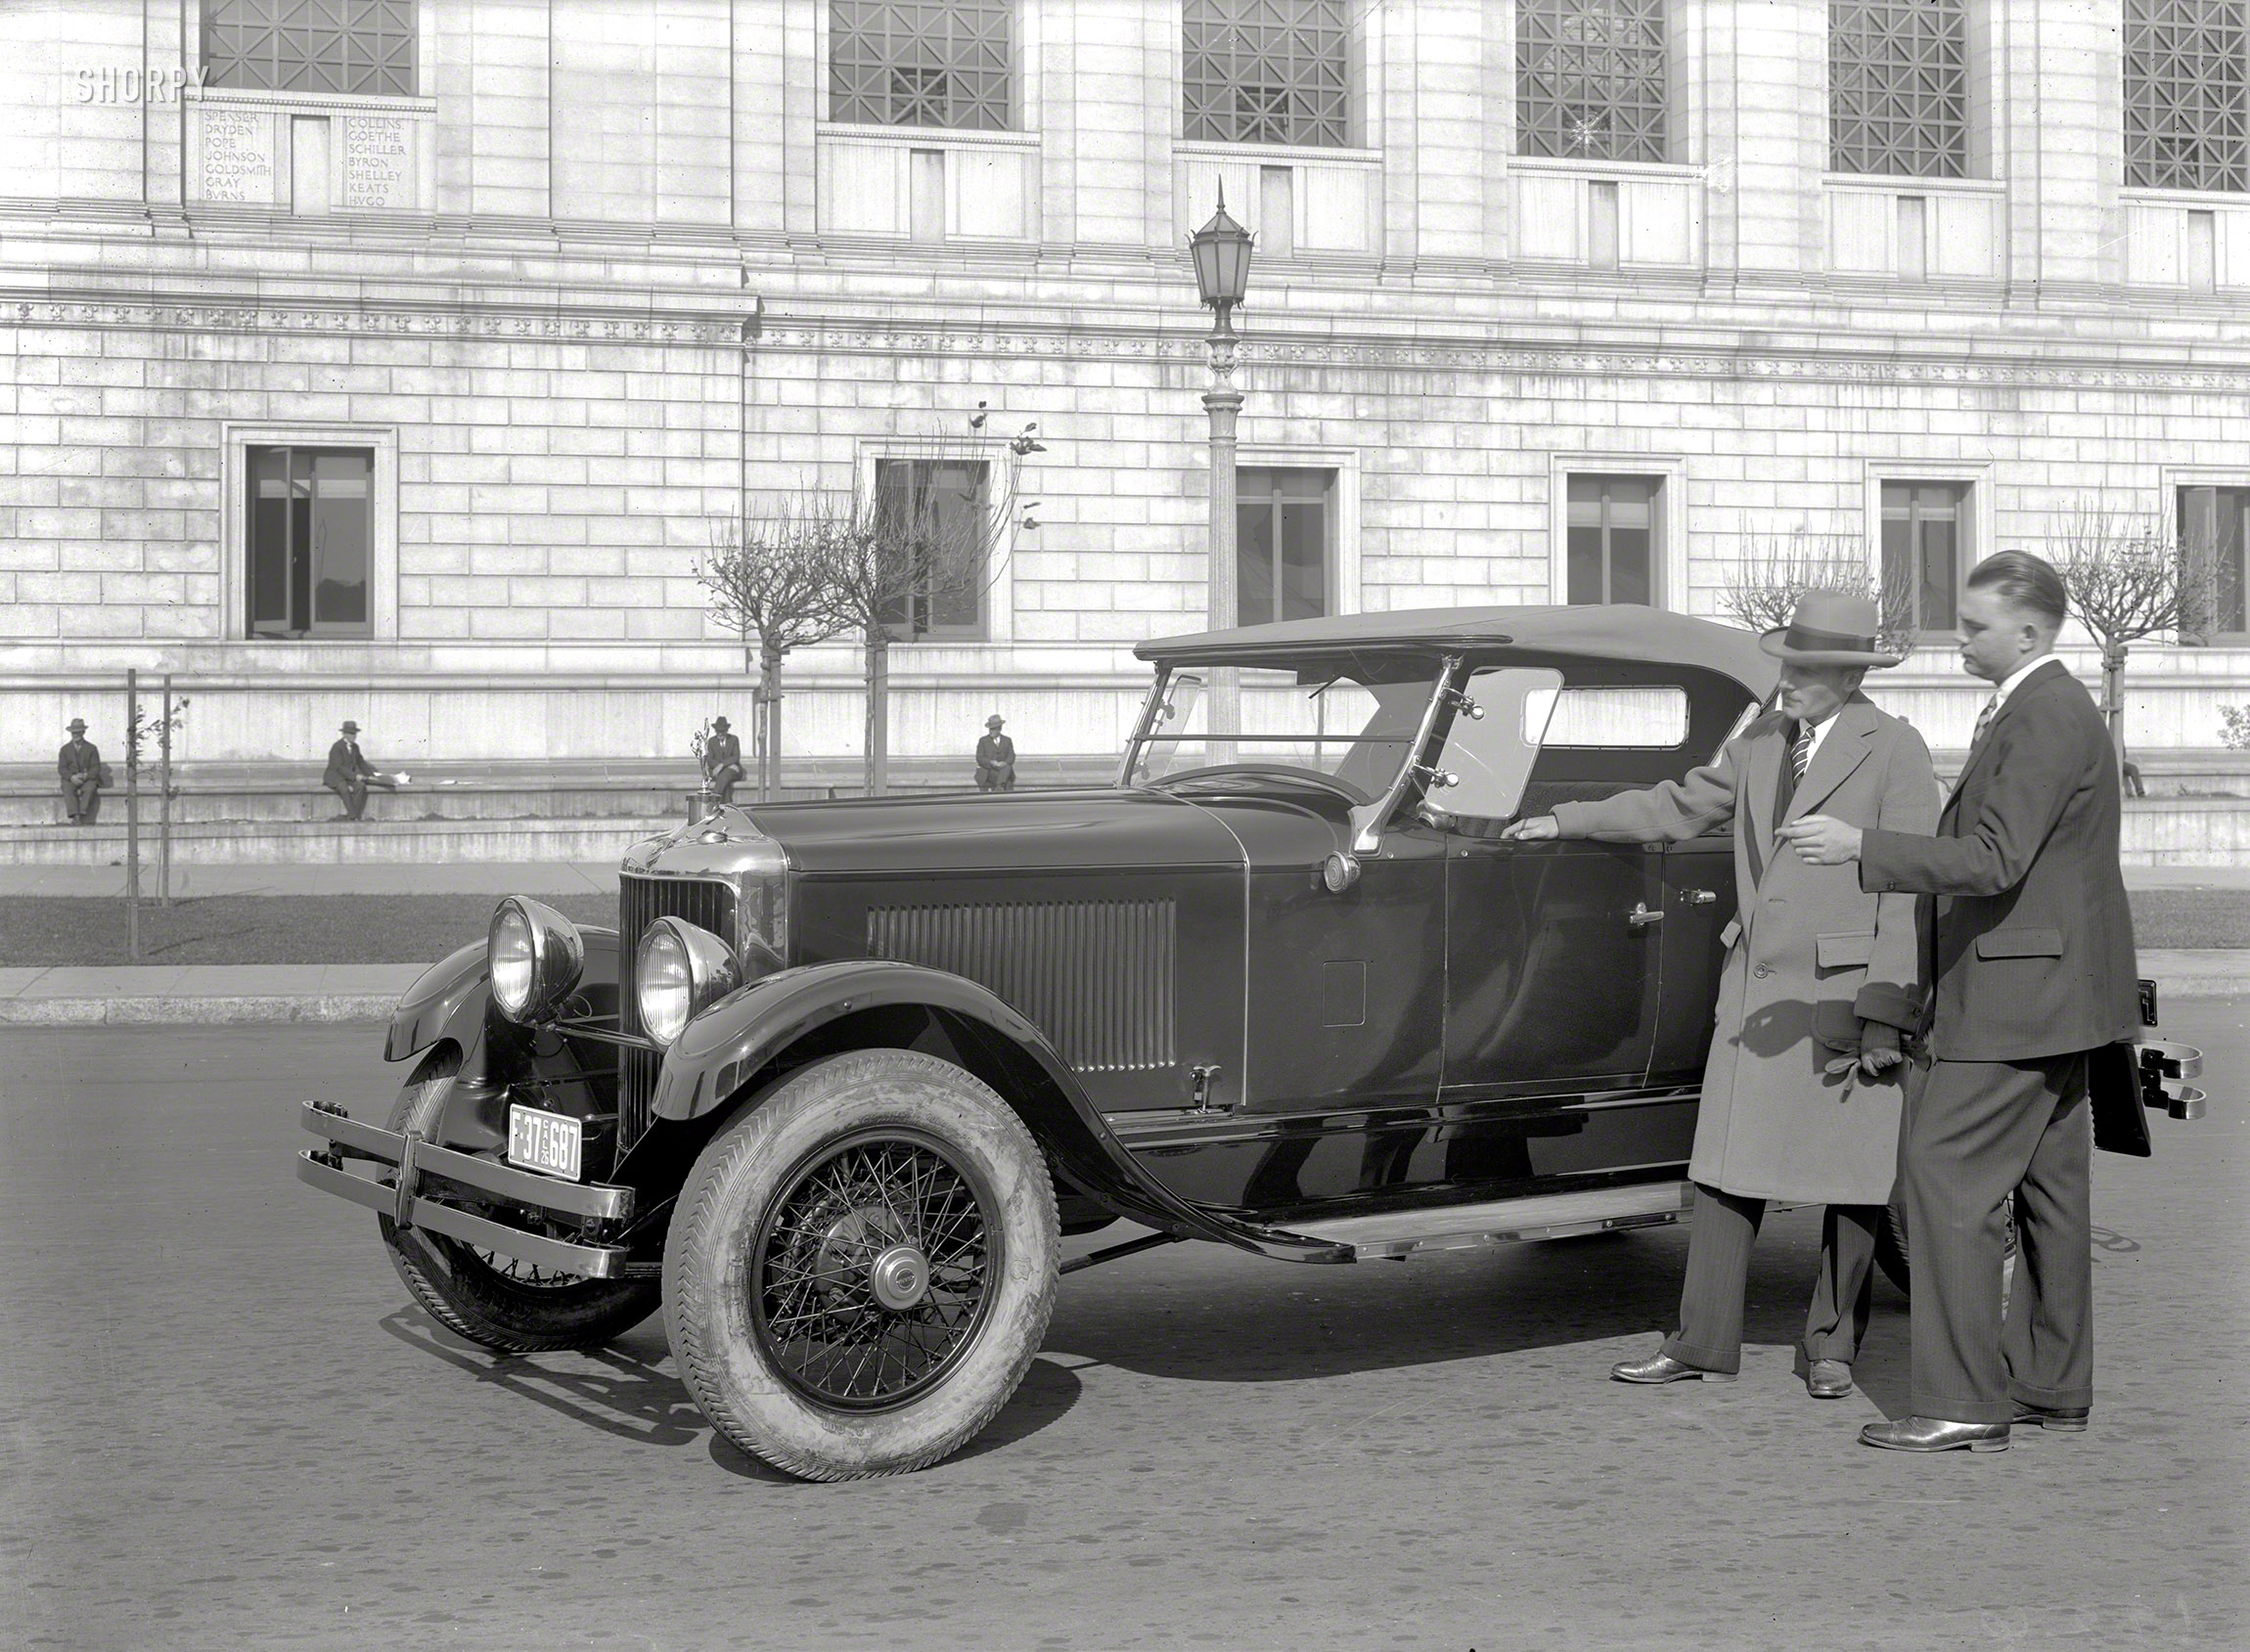 San Francisco, 1926. "Diana 8 at Civic Center." The short-lived Diana, a car for  the ladies and one the more obscure entries in the Shorpy Pantheon of Forgotten Phaetons. 5x7 glass negative by Christopher Helin. View full size.